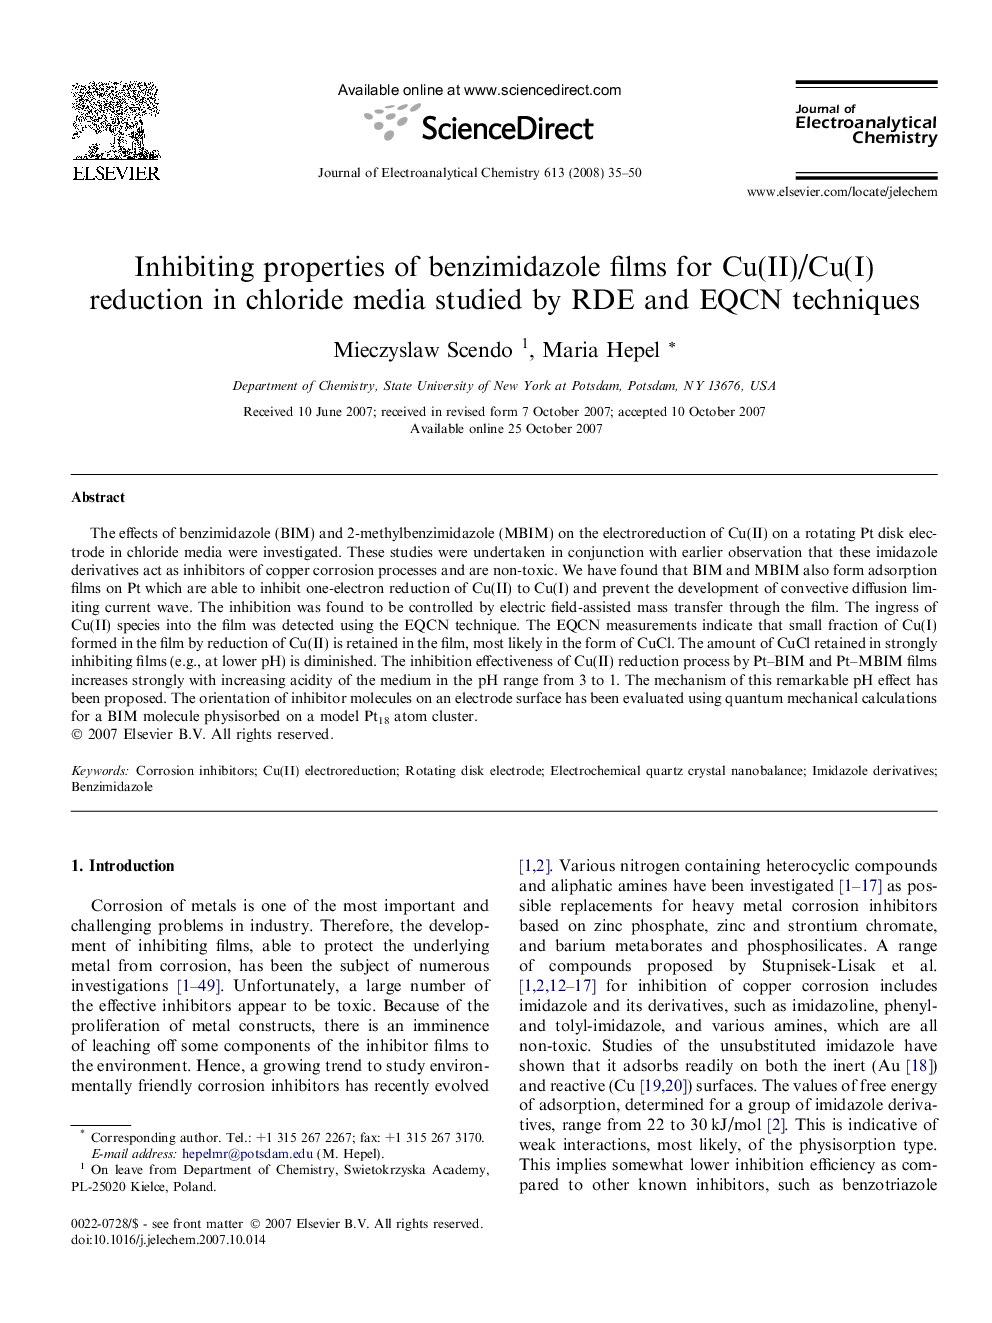 Inhibiting properties of benzimidazole films for Cu(II)/Cu(I) reduction in chloride media studied by RDE and EQCN techniques